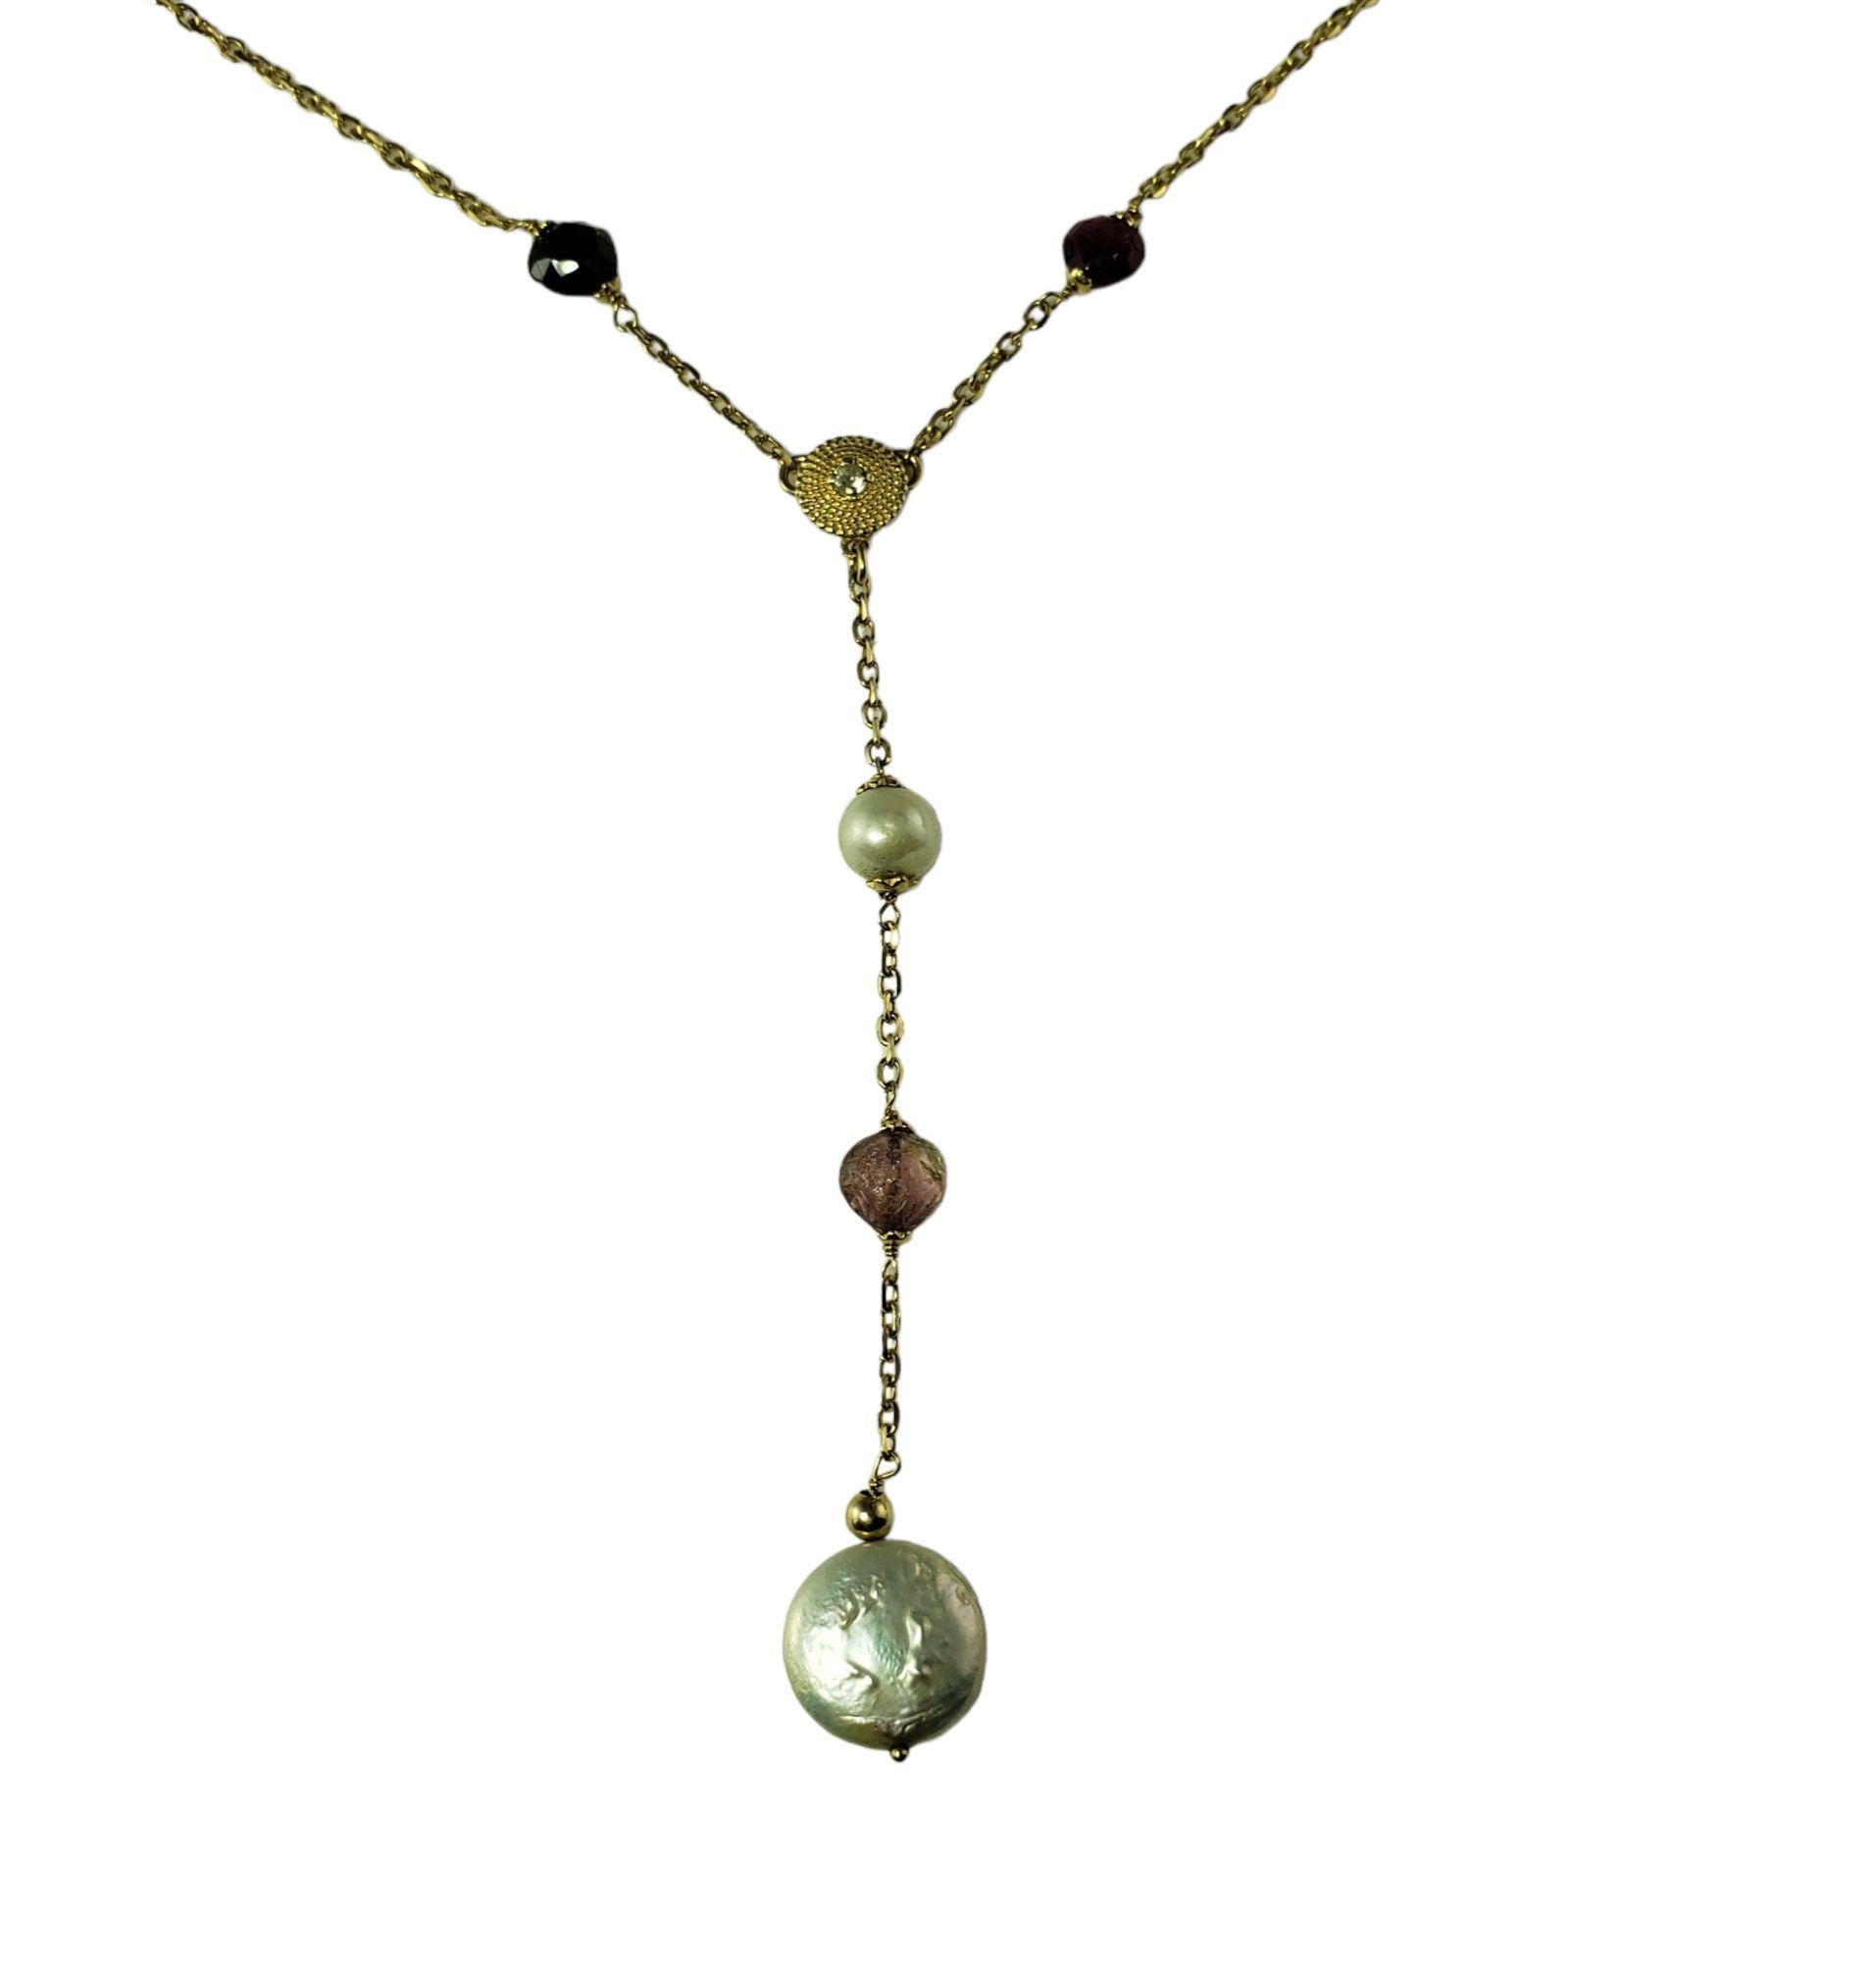 Vintage 14 Karat Yellow Gold Pearl and Tourmaline Drop Necklace-

This lovely drop necklace features five white pearls, one round single cut diamond and five briolette Bi- Color Tourmalines set on a classic 14K yellow gold chain.

Approximate total